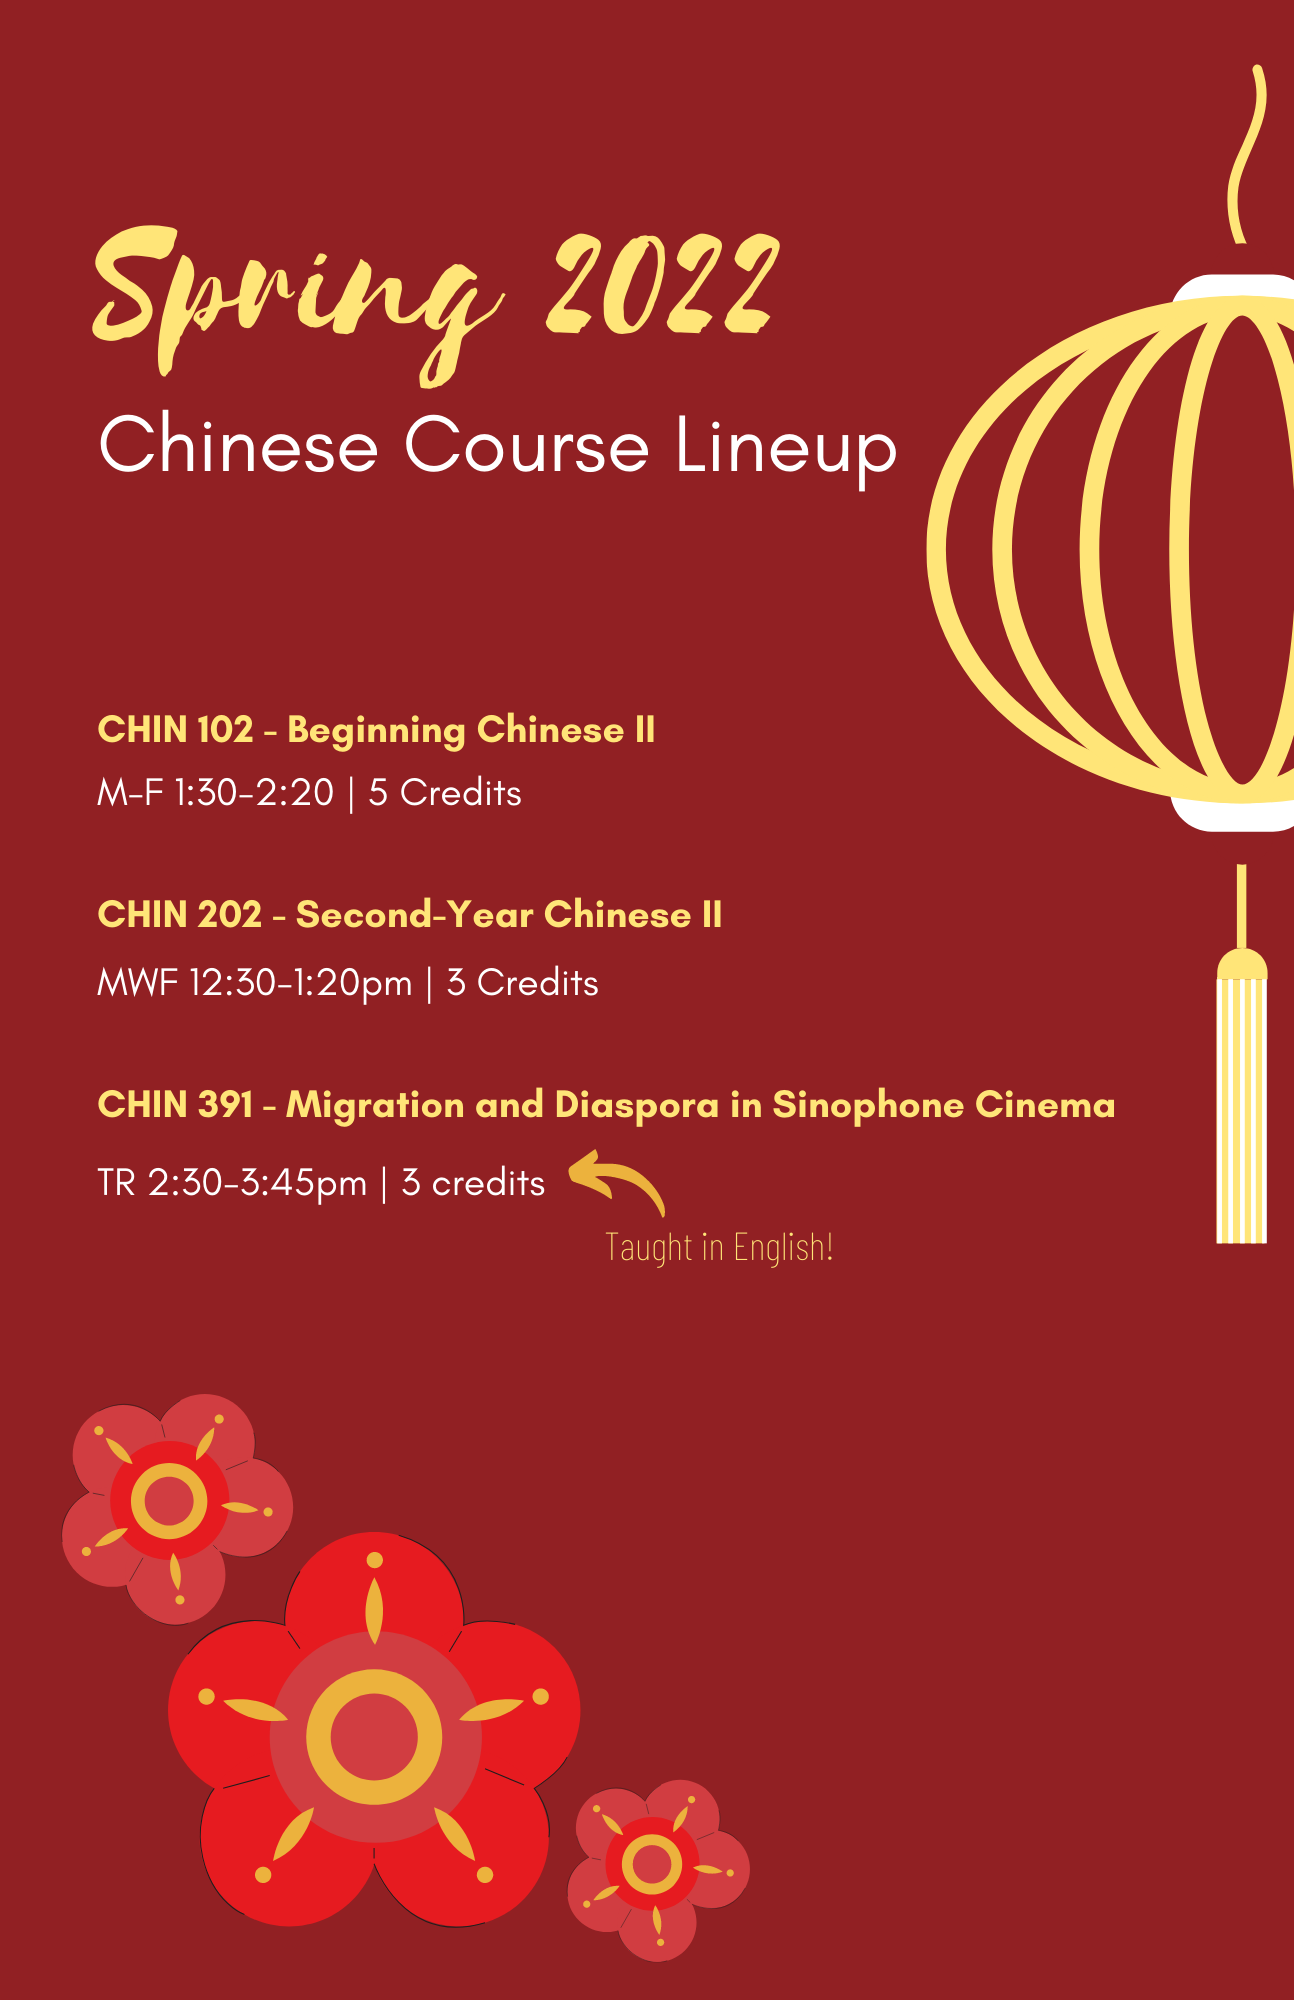 Spring 2022 Chinese Course Lineup